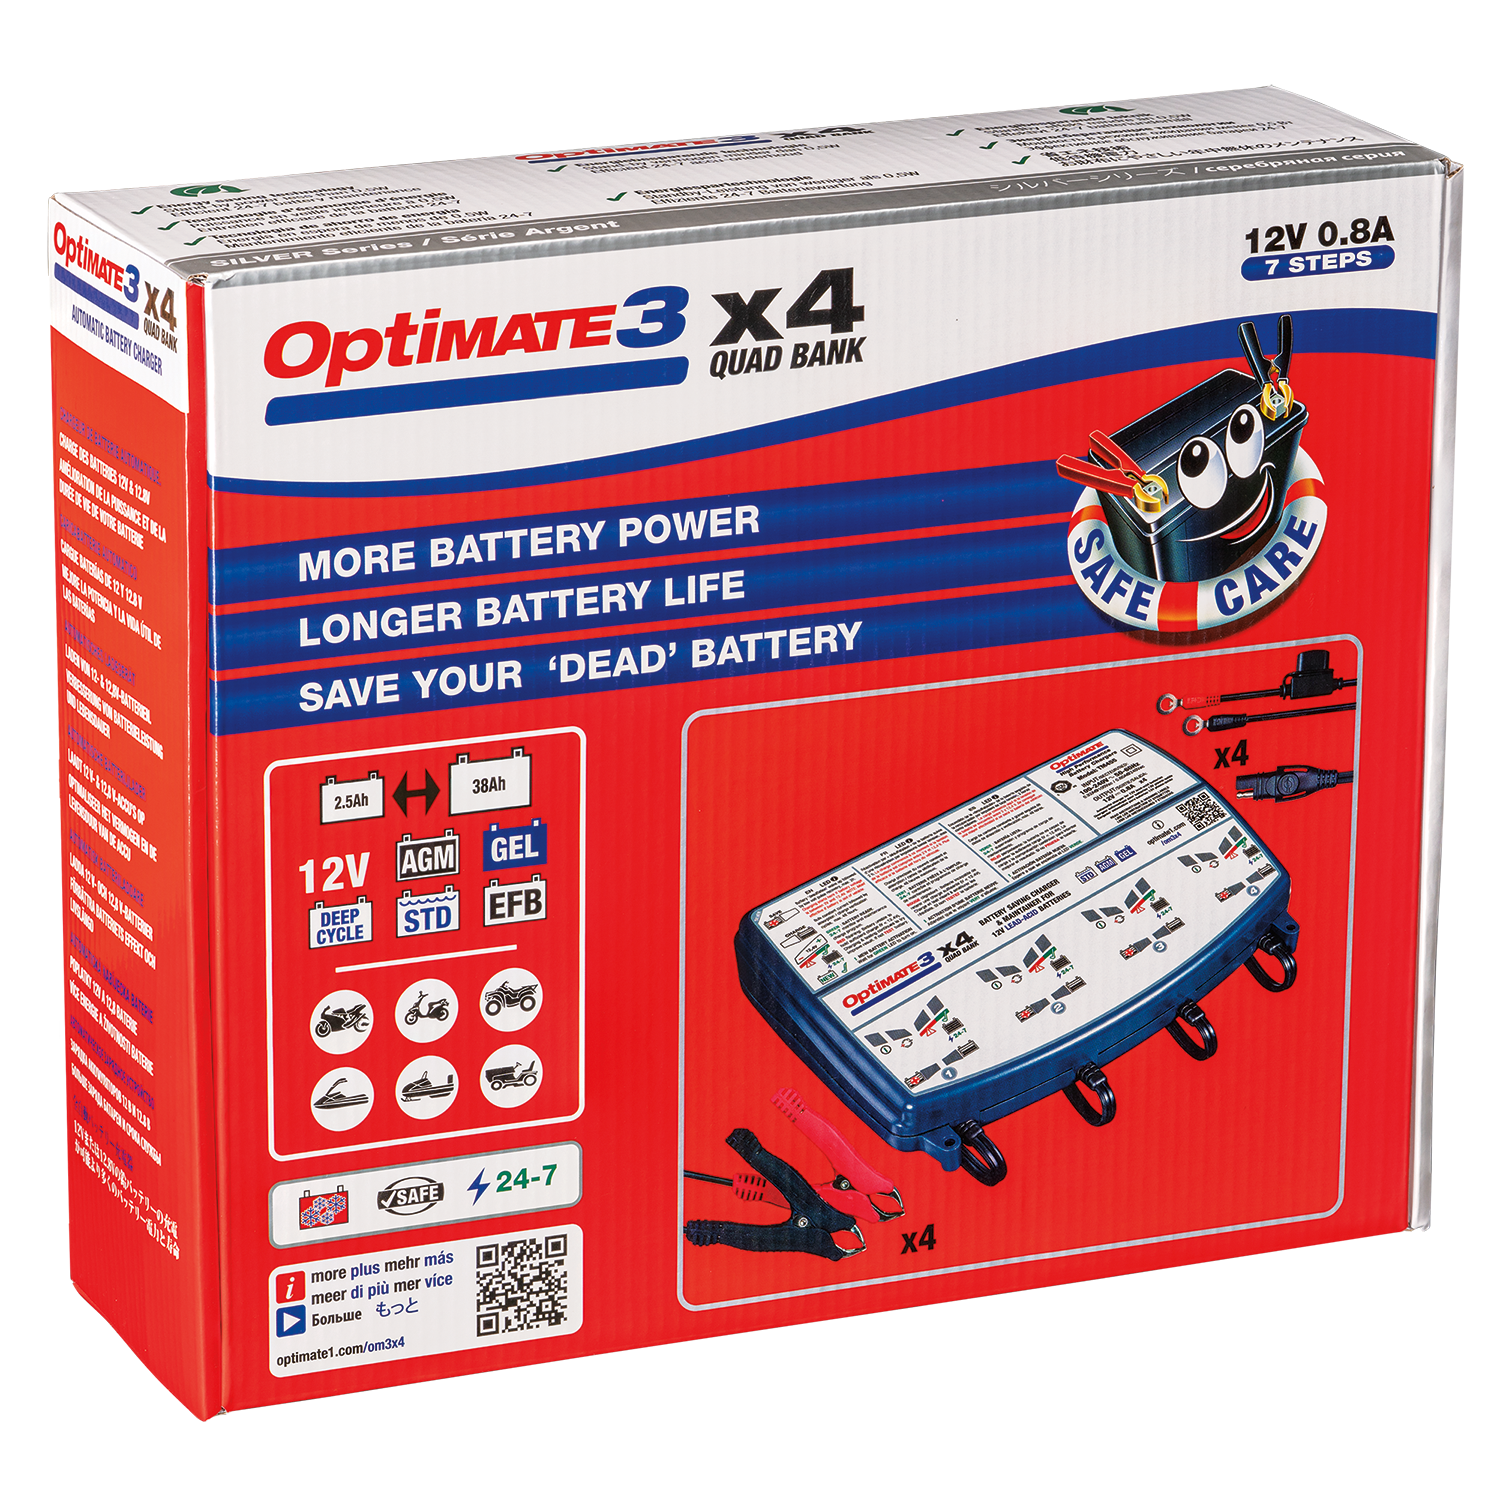 Polaris General TecMate Optimate 3 X4 Battery Charger by Optimate